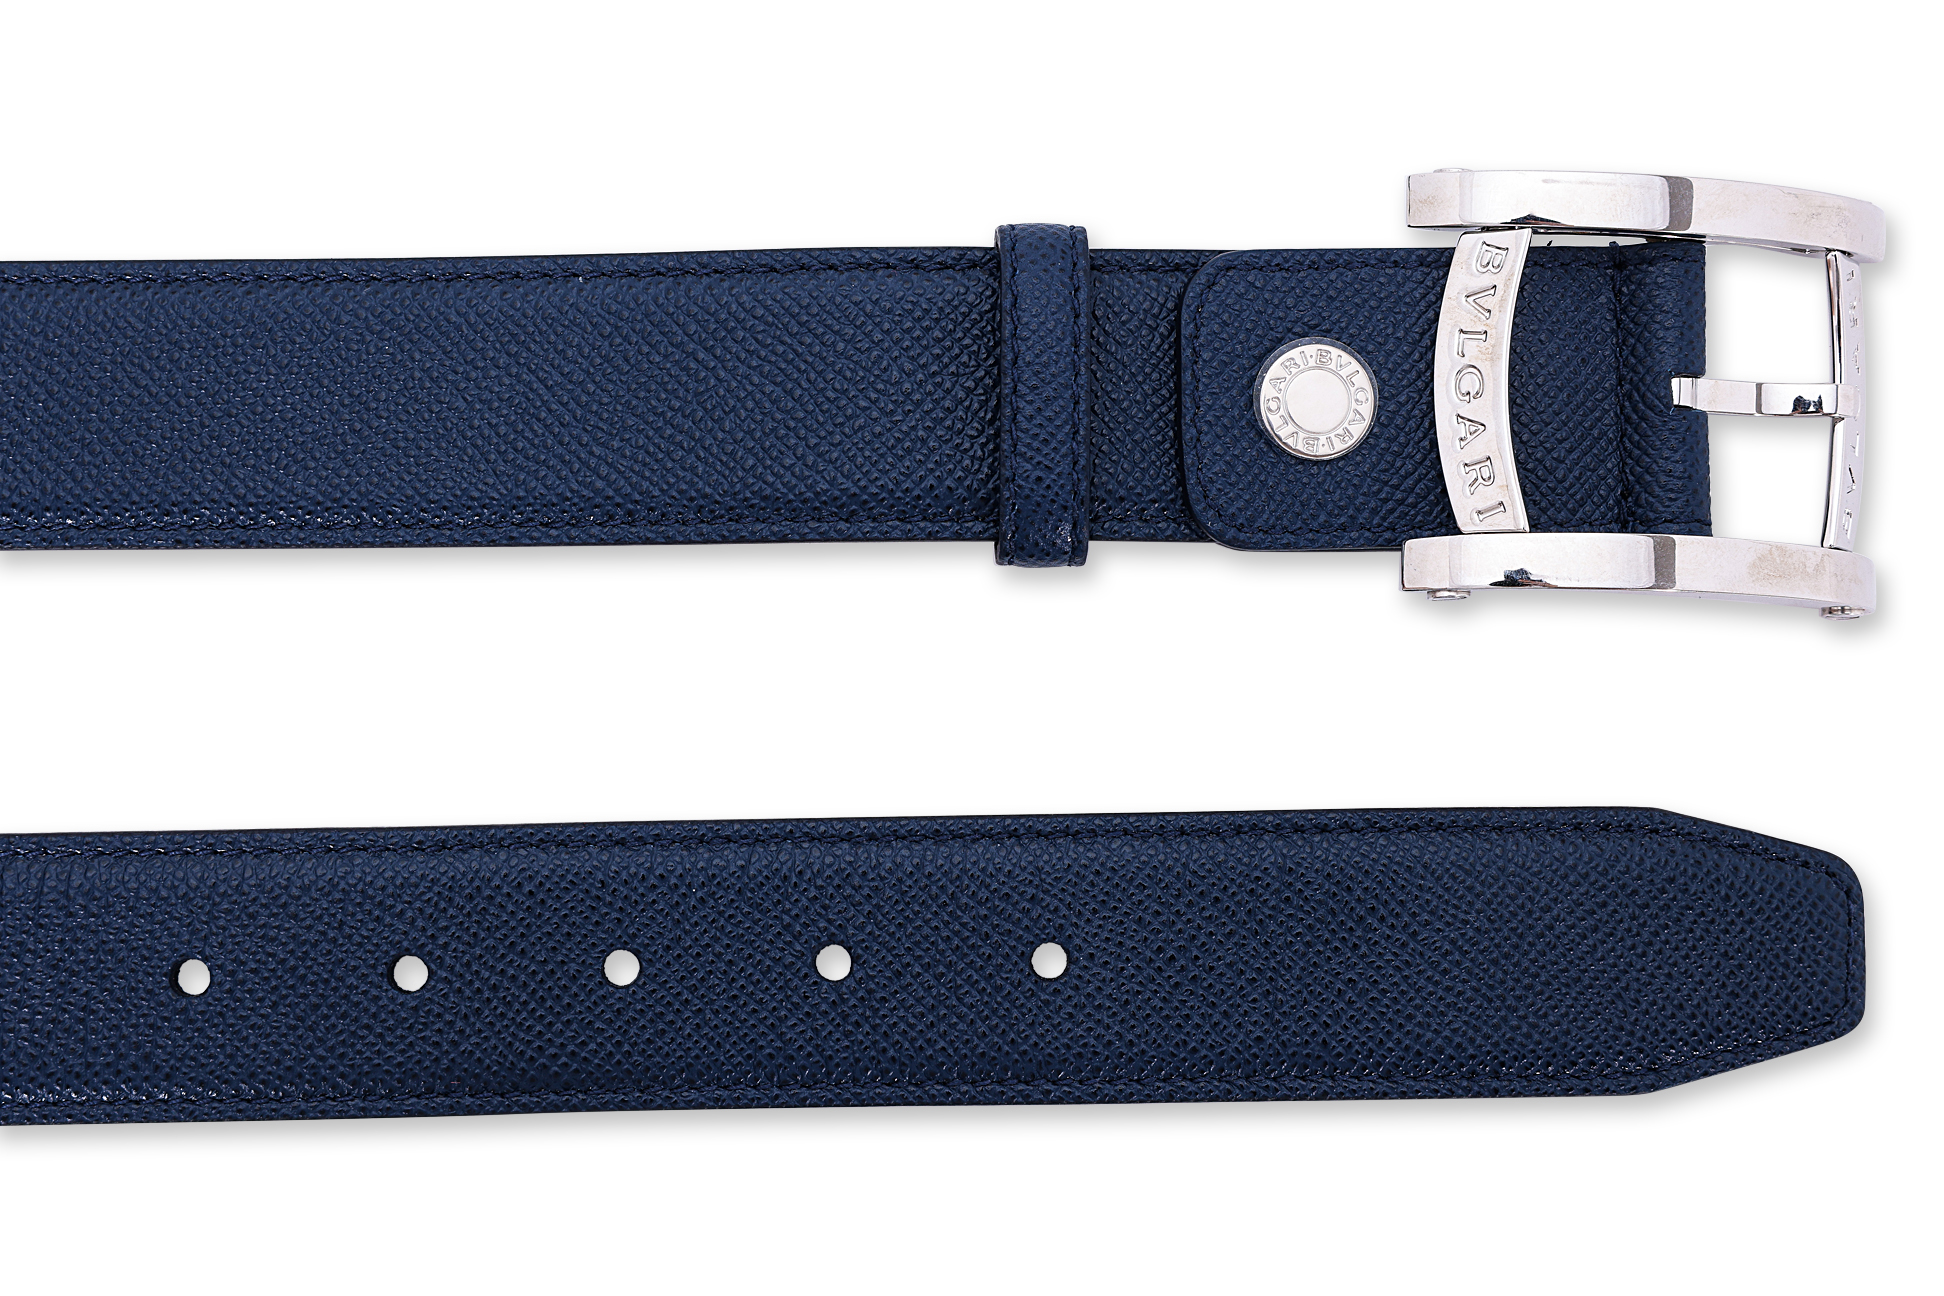 A GUCCI AND BVLGARI MEN'S LEATHER BELT - Image 2 of 3